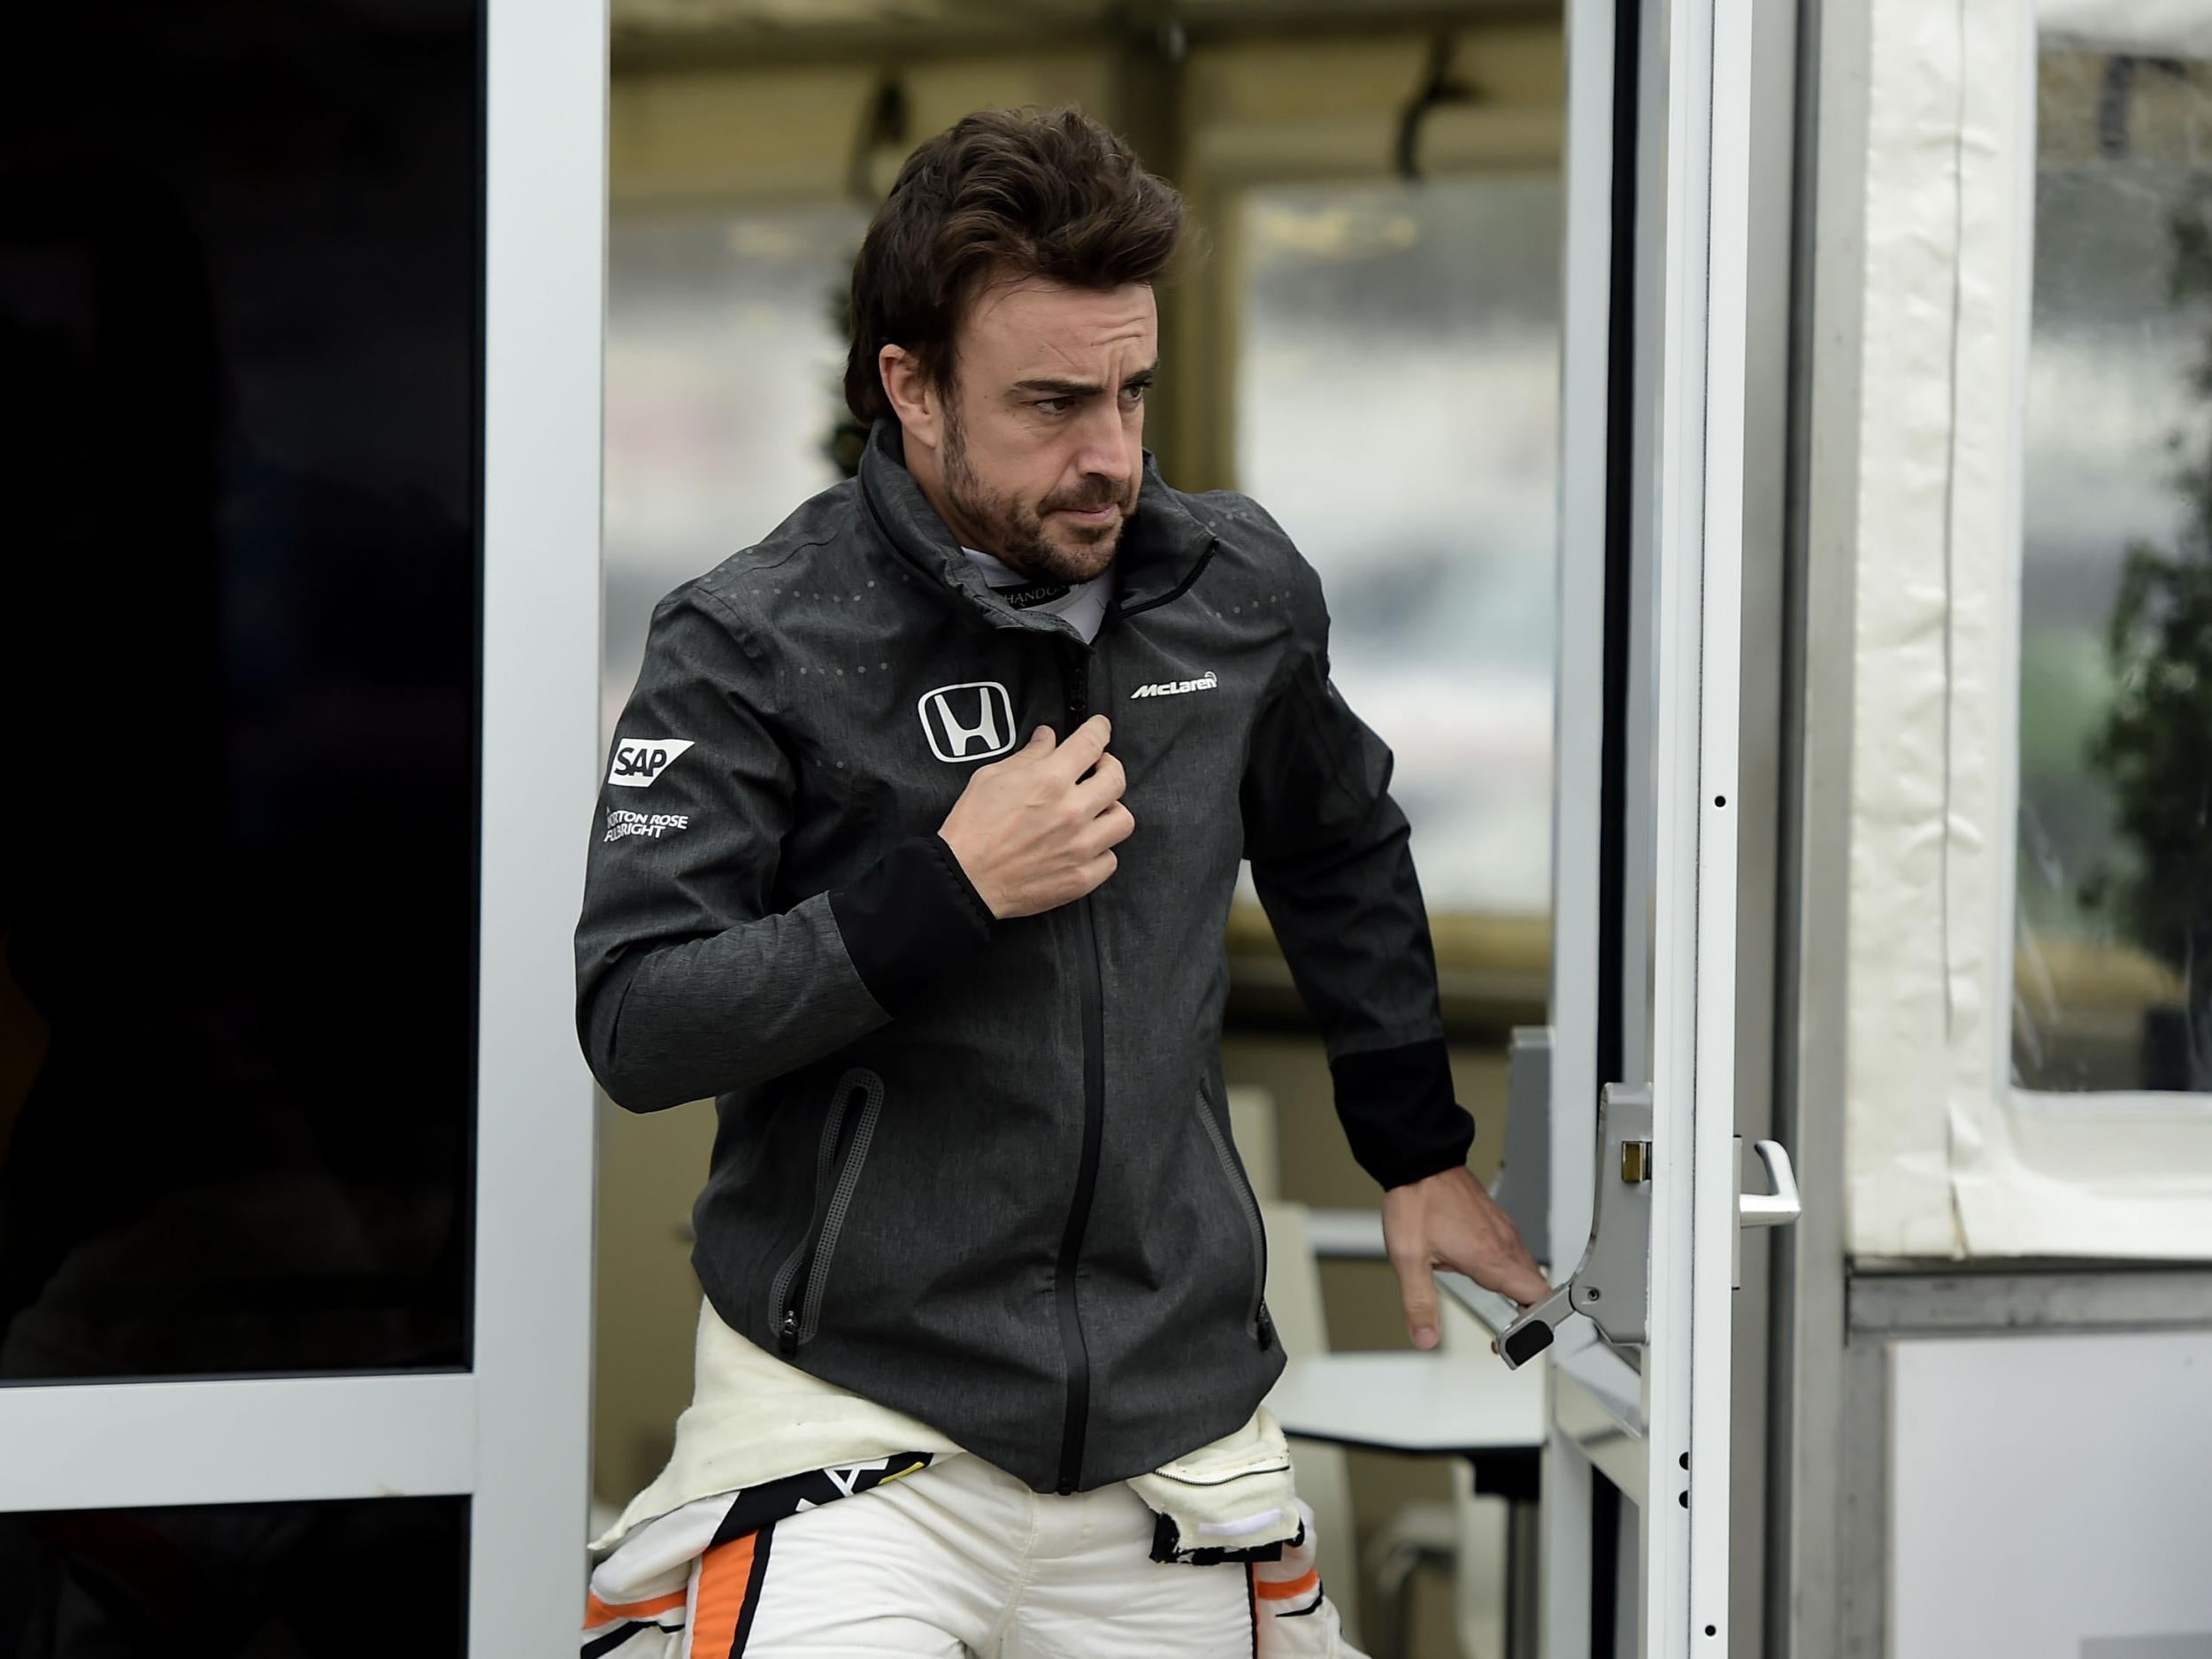 Alonso's McLaren has shown no signs of improving following continual engine problems